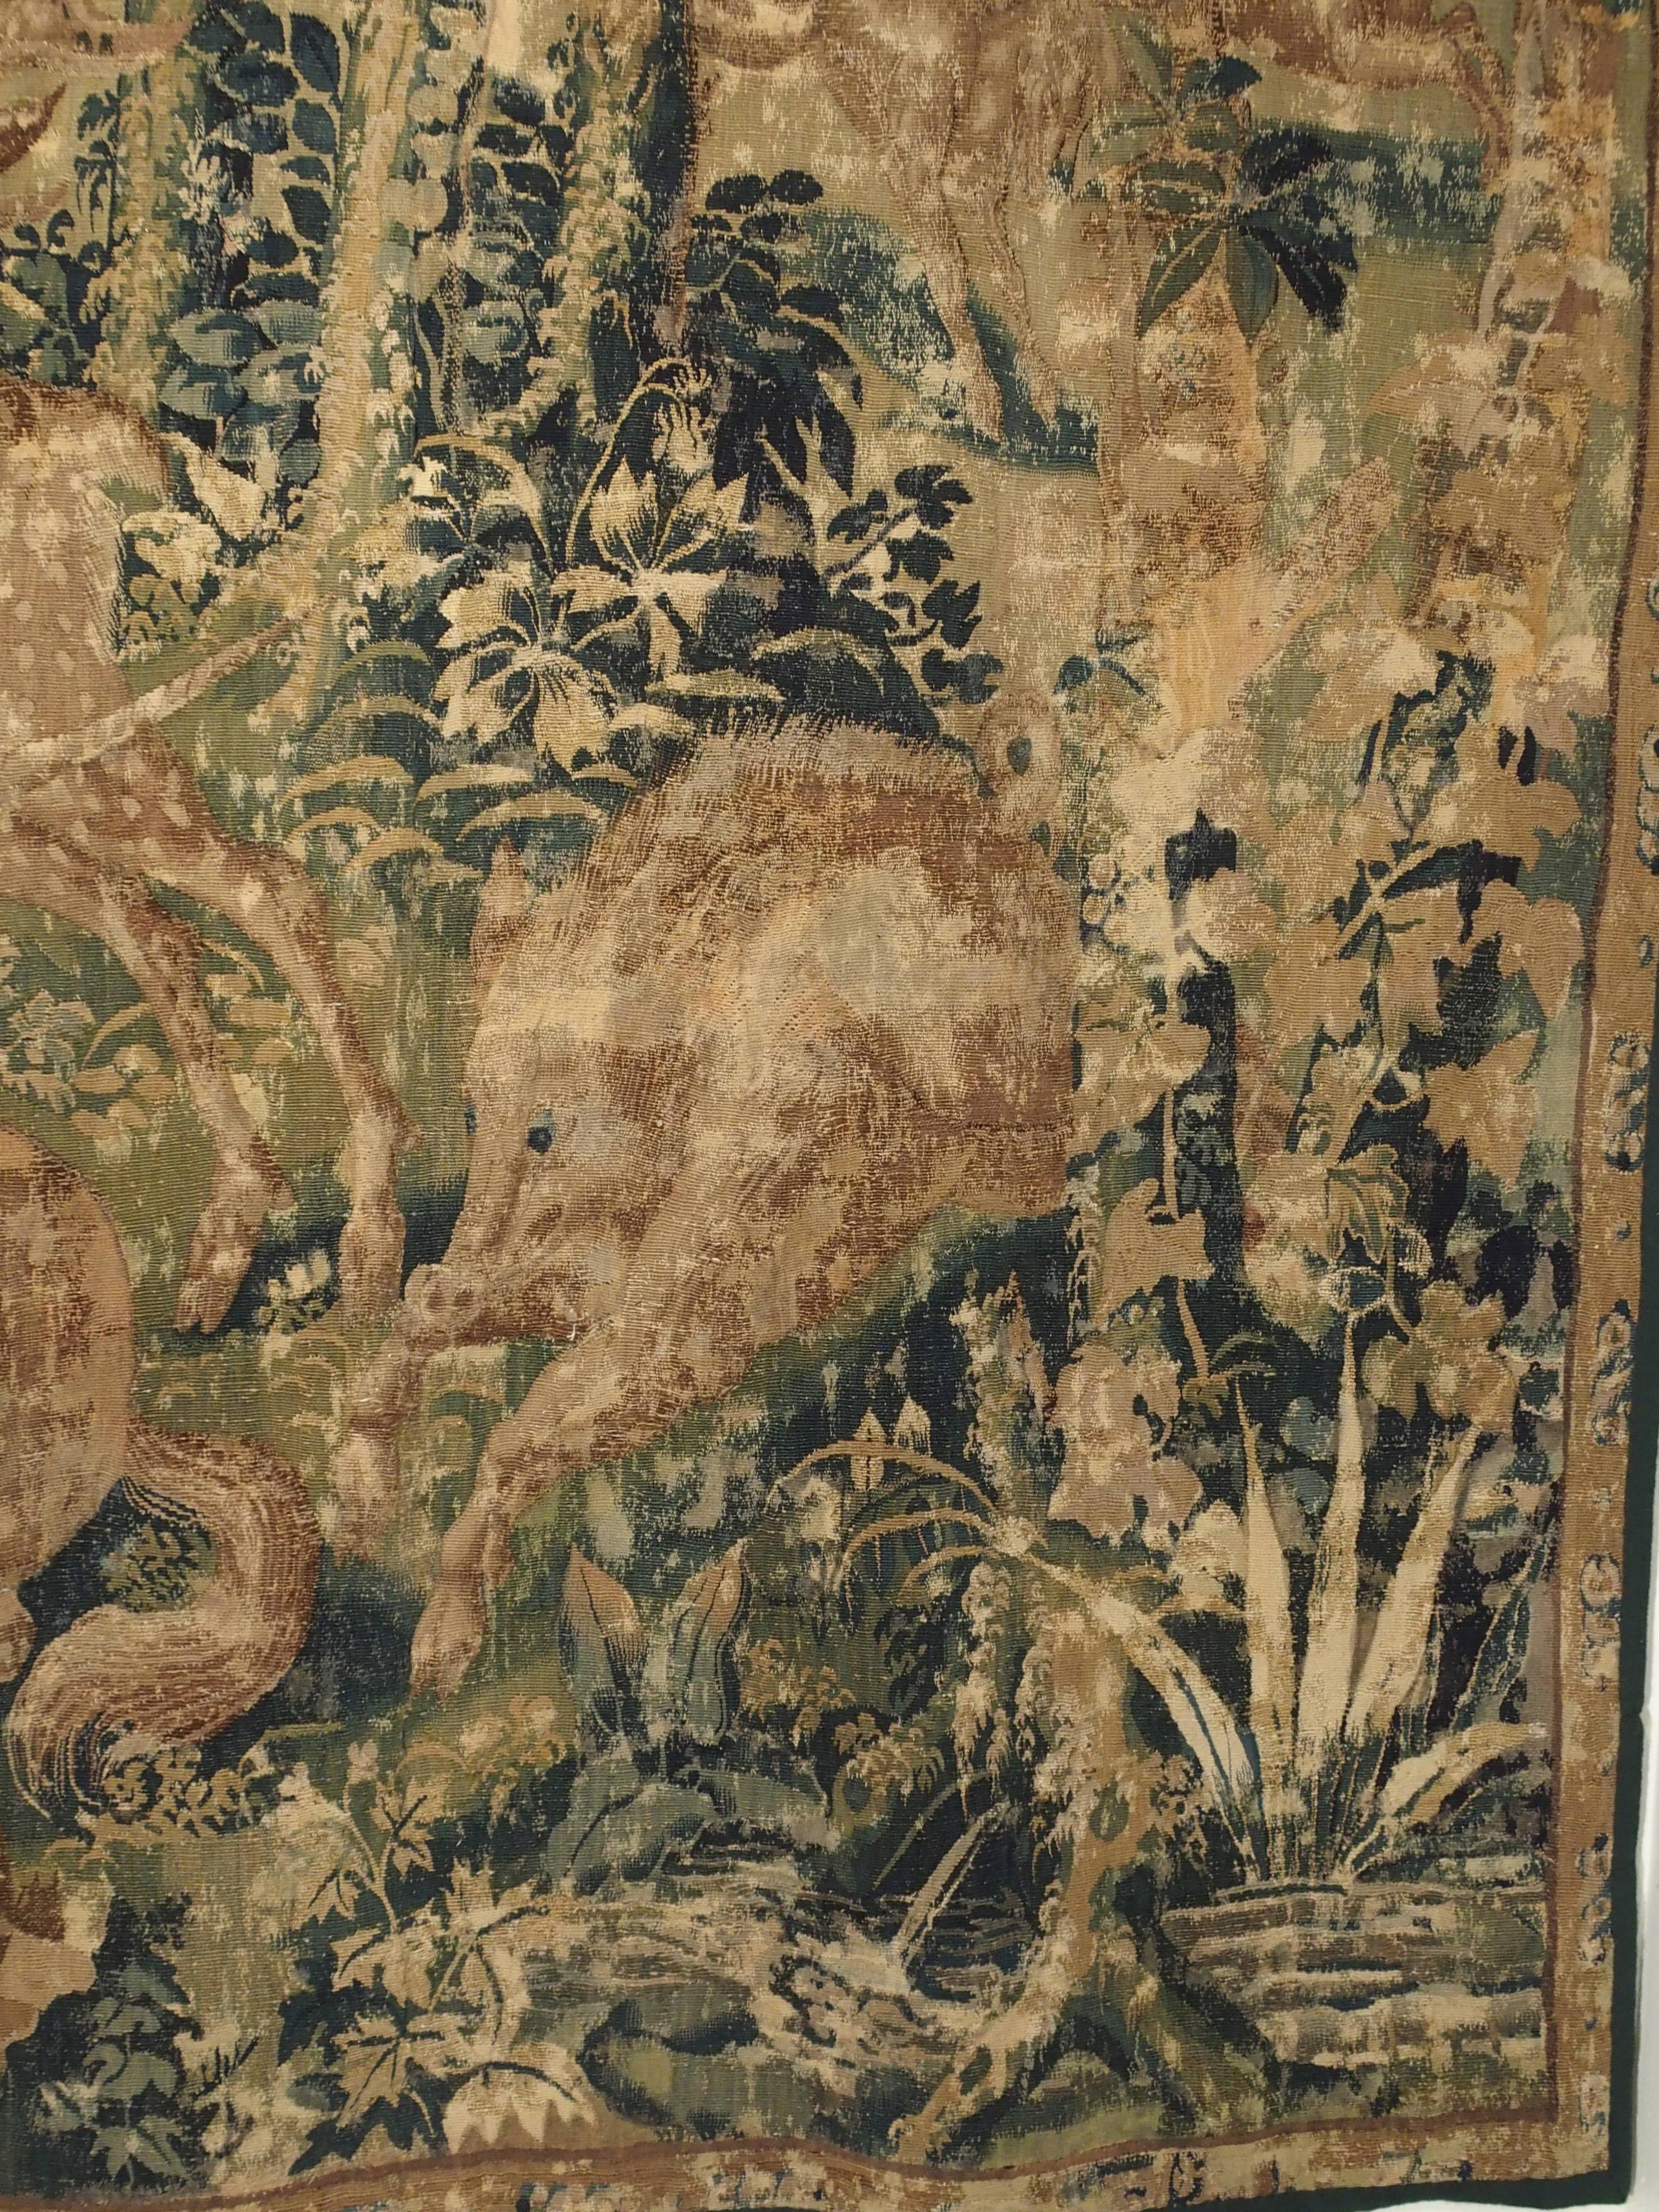 Late 16th Century Flemish Game Park Tapestry with Unicorn, Stag, and Boar 2